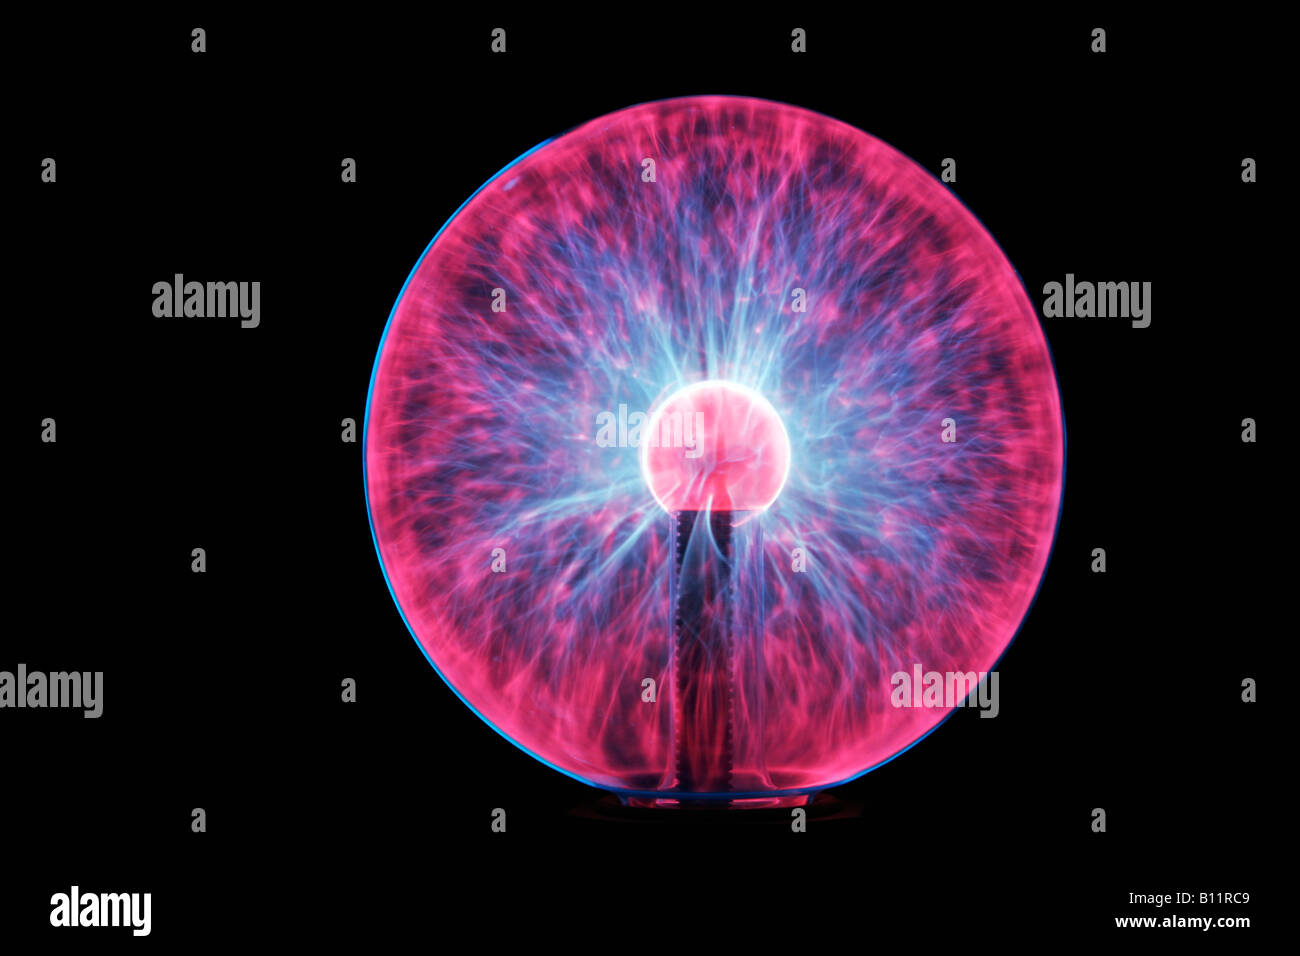 Plasma Ball. Plasma lamps are available in spheres and cylinders. plasma lamp is usually a clear glass orb. Stock Photo